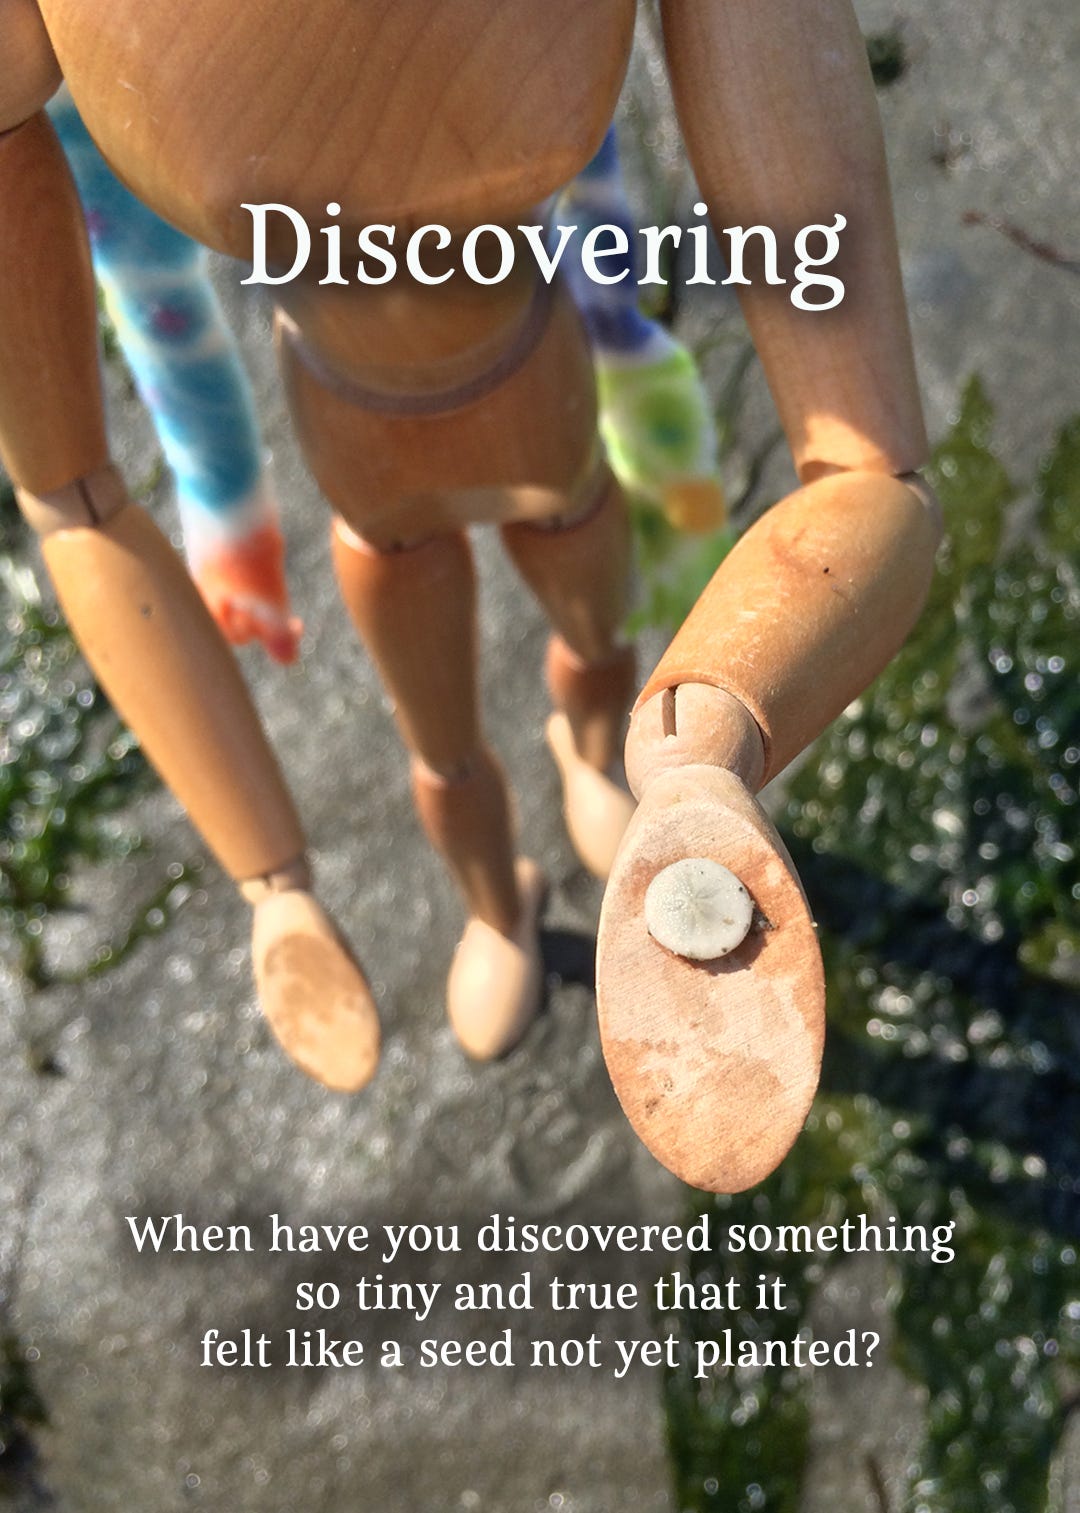 Emotikin is viewed from top down, holding a miniscule sand dollar in her palm. The image is titled Discovering and the text question says When have you discovered something so tiny and true that it felt like a seed not yet planted?